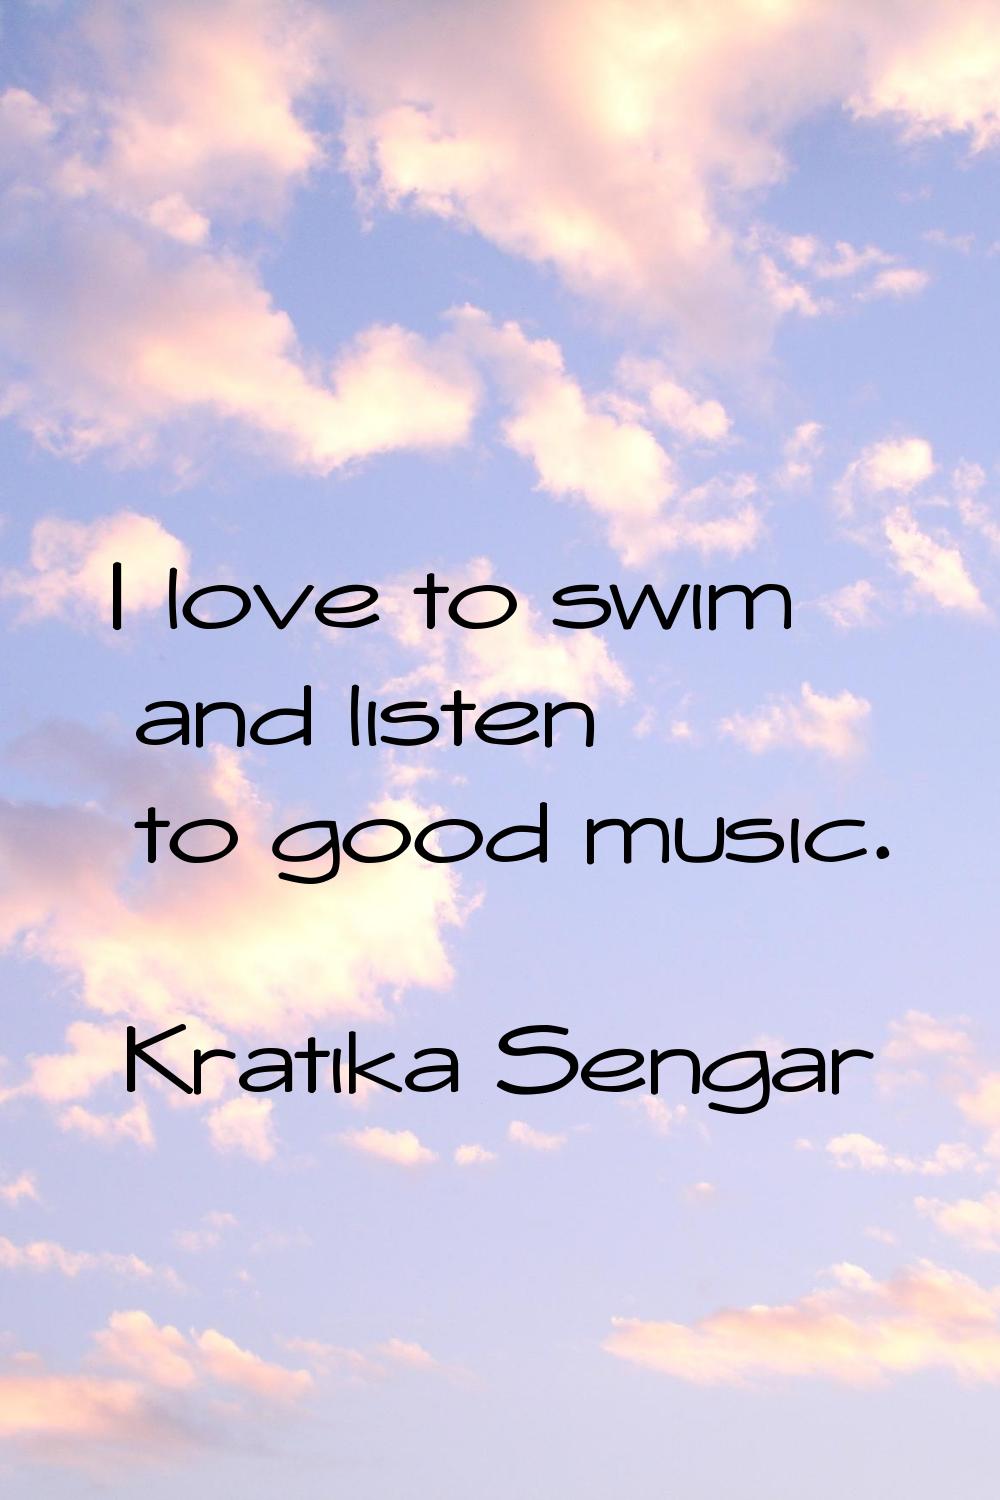 I love to swim and listen to good music.